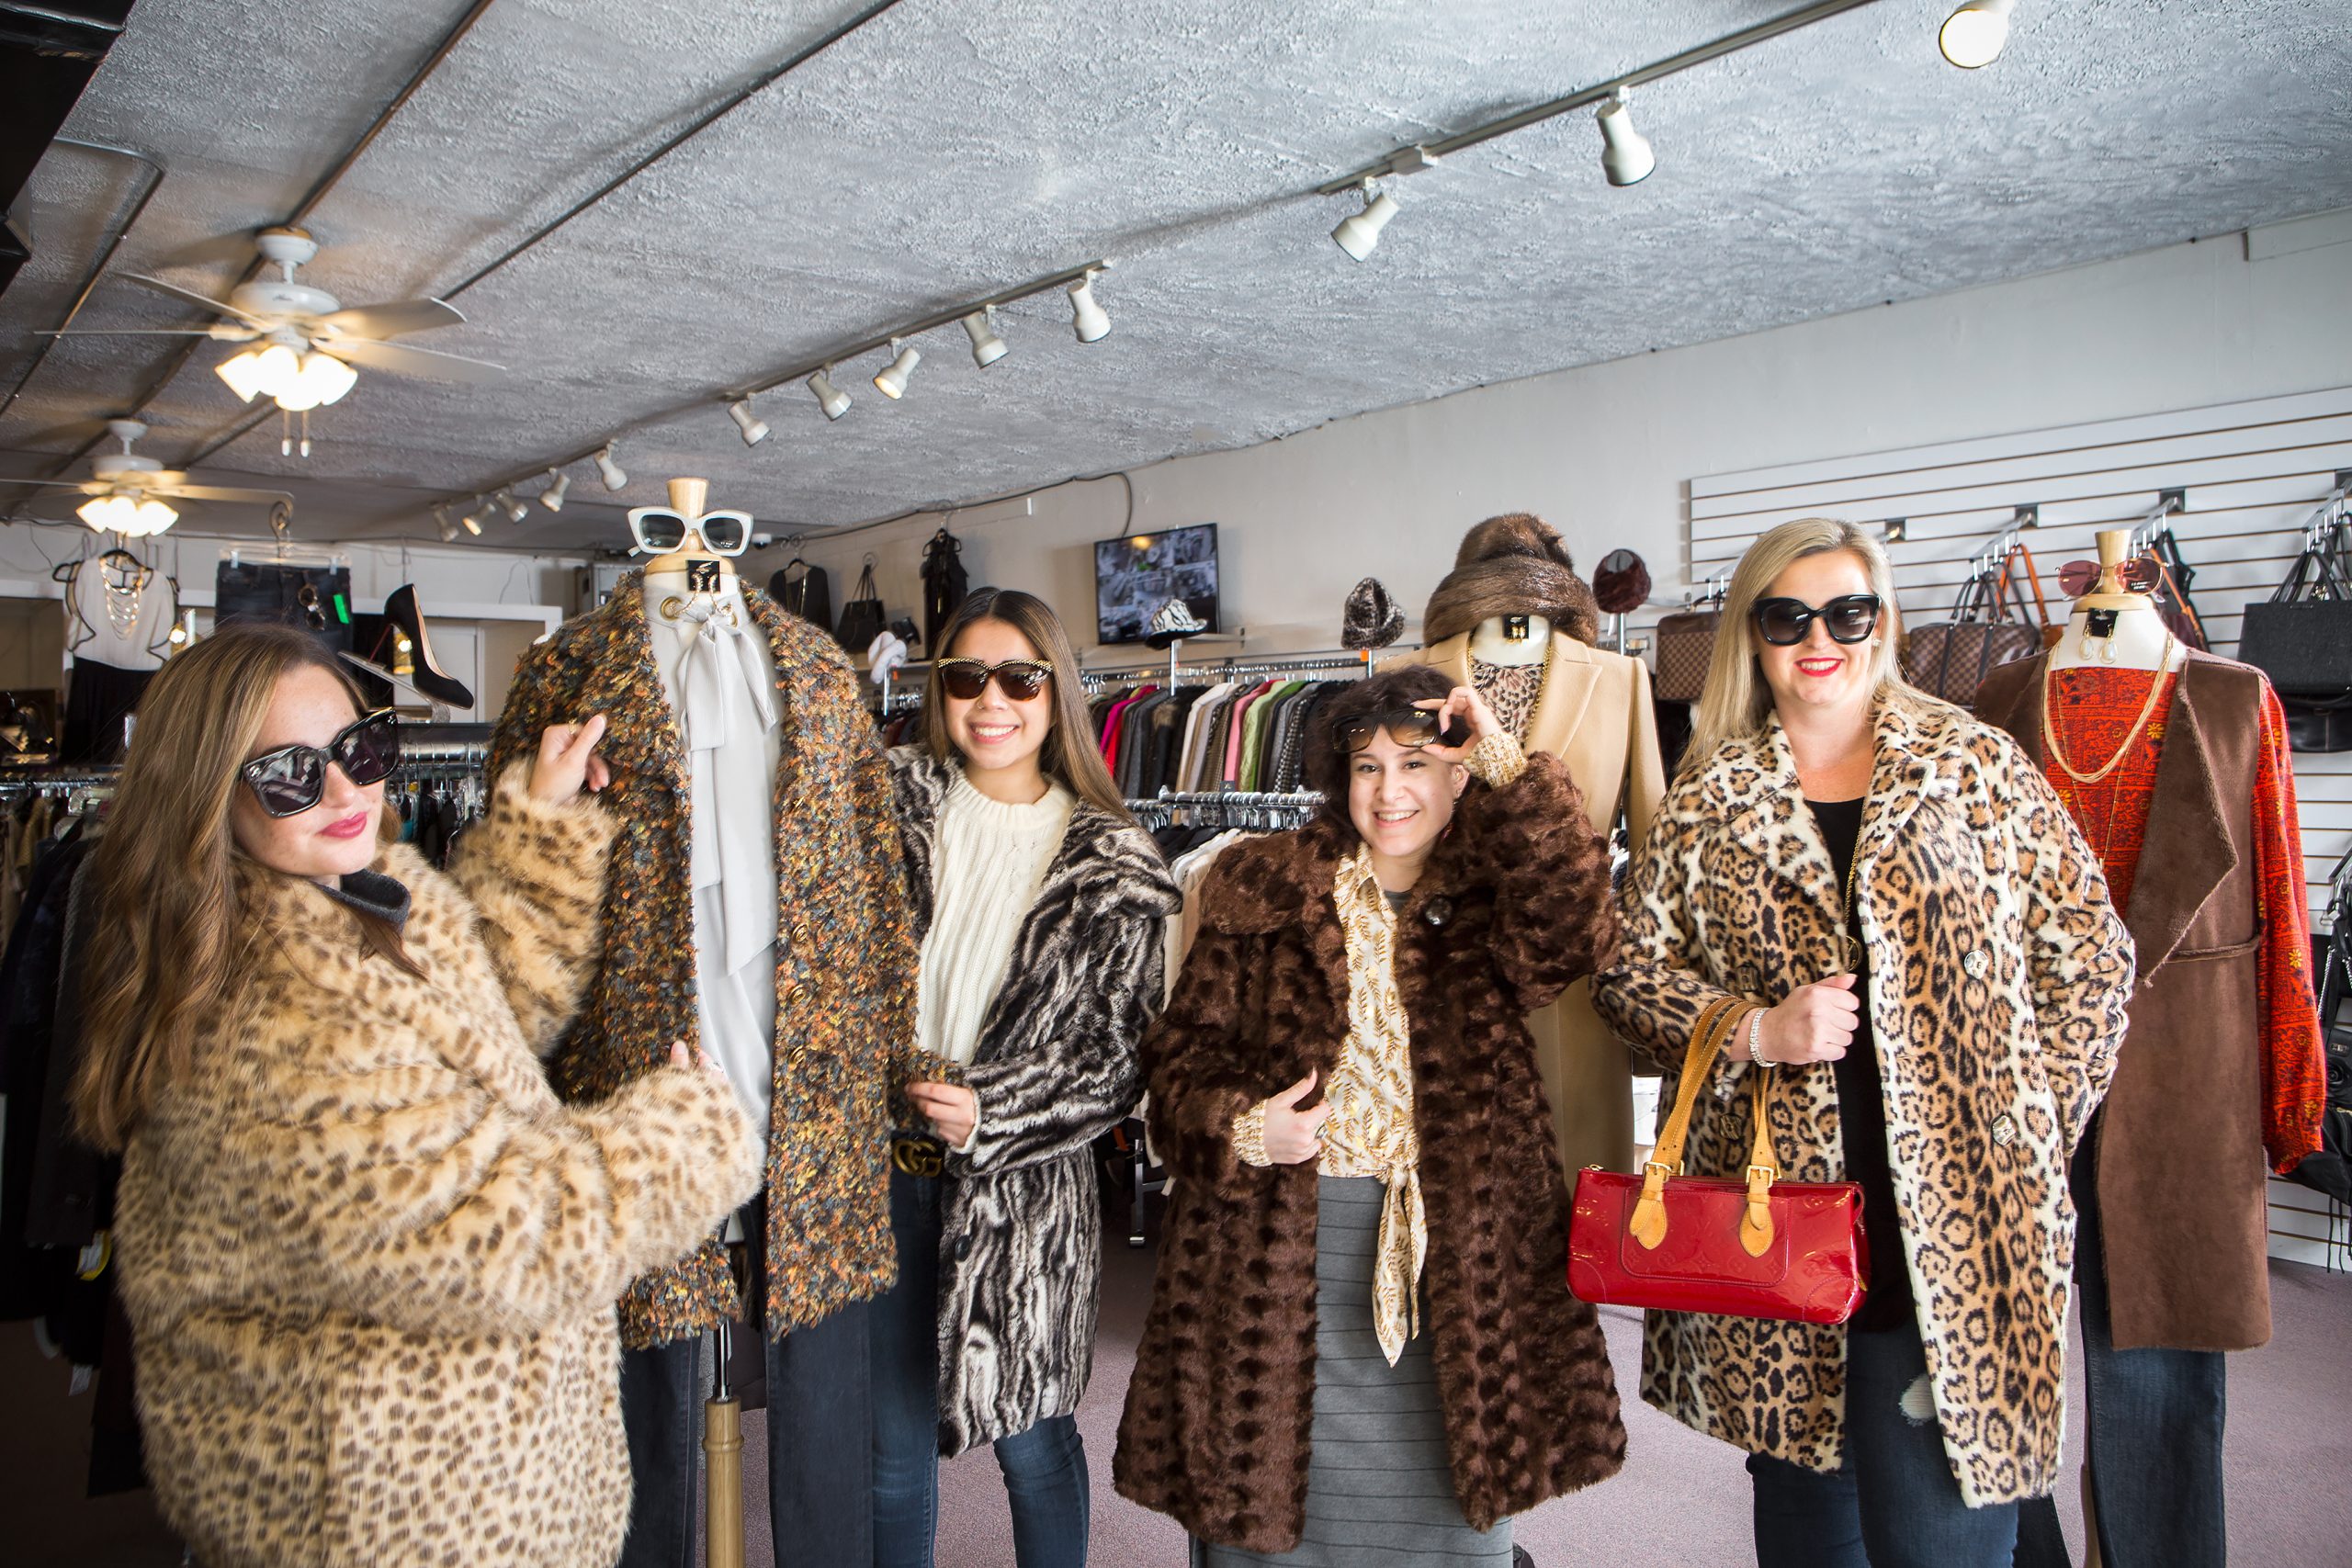 Audrey Delk, Ana Hait, Charlotte Wallace, and owner Heather Burns are ready for shoppers this winter in fashionable furs at Revente, voted Best Consignment Clothing Store.